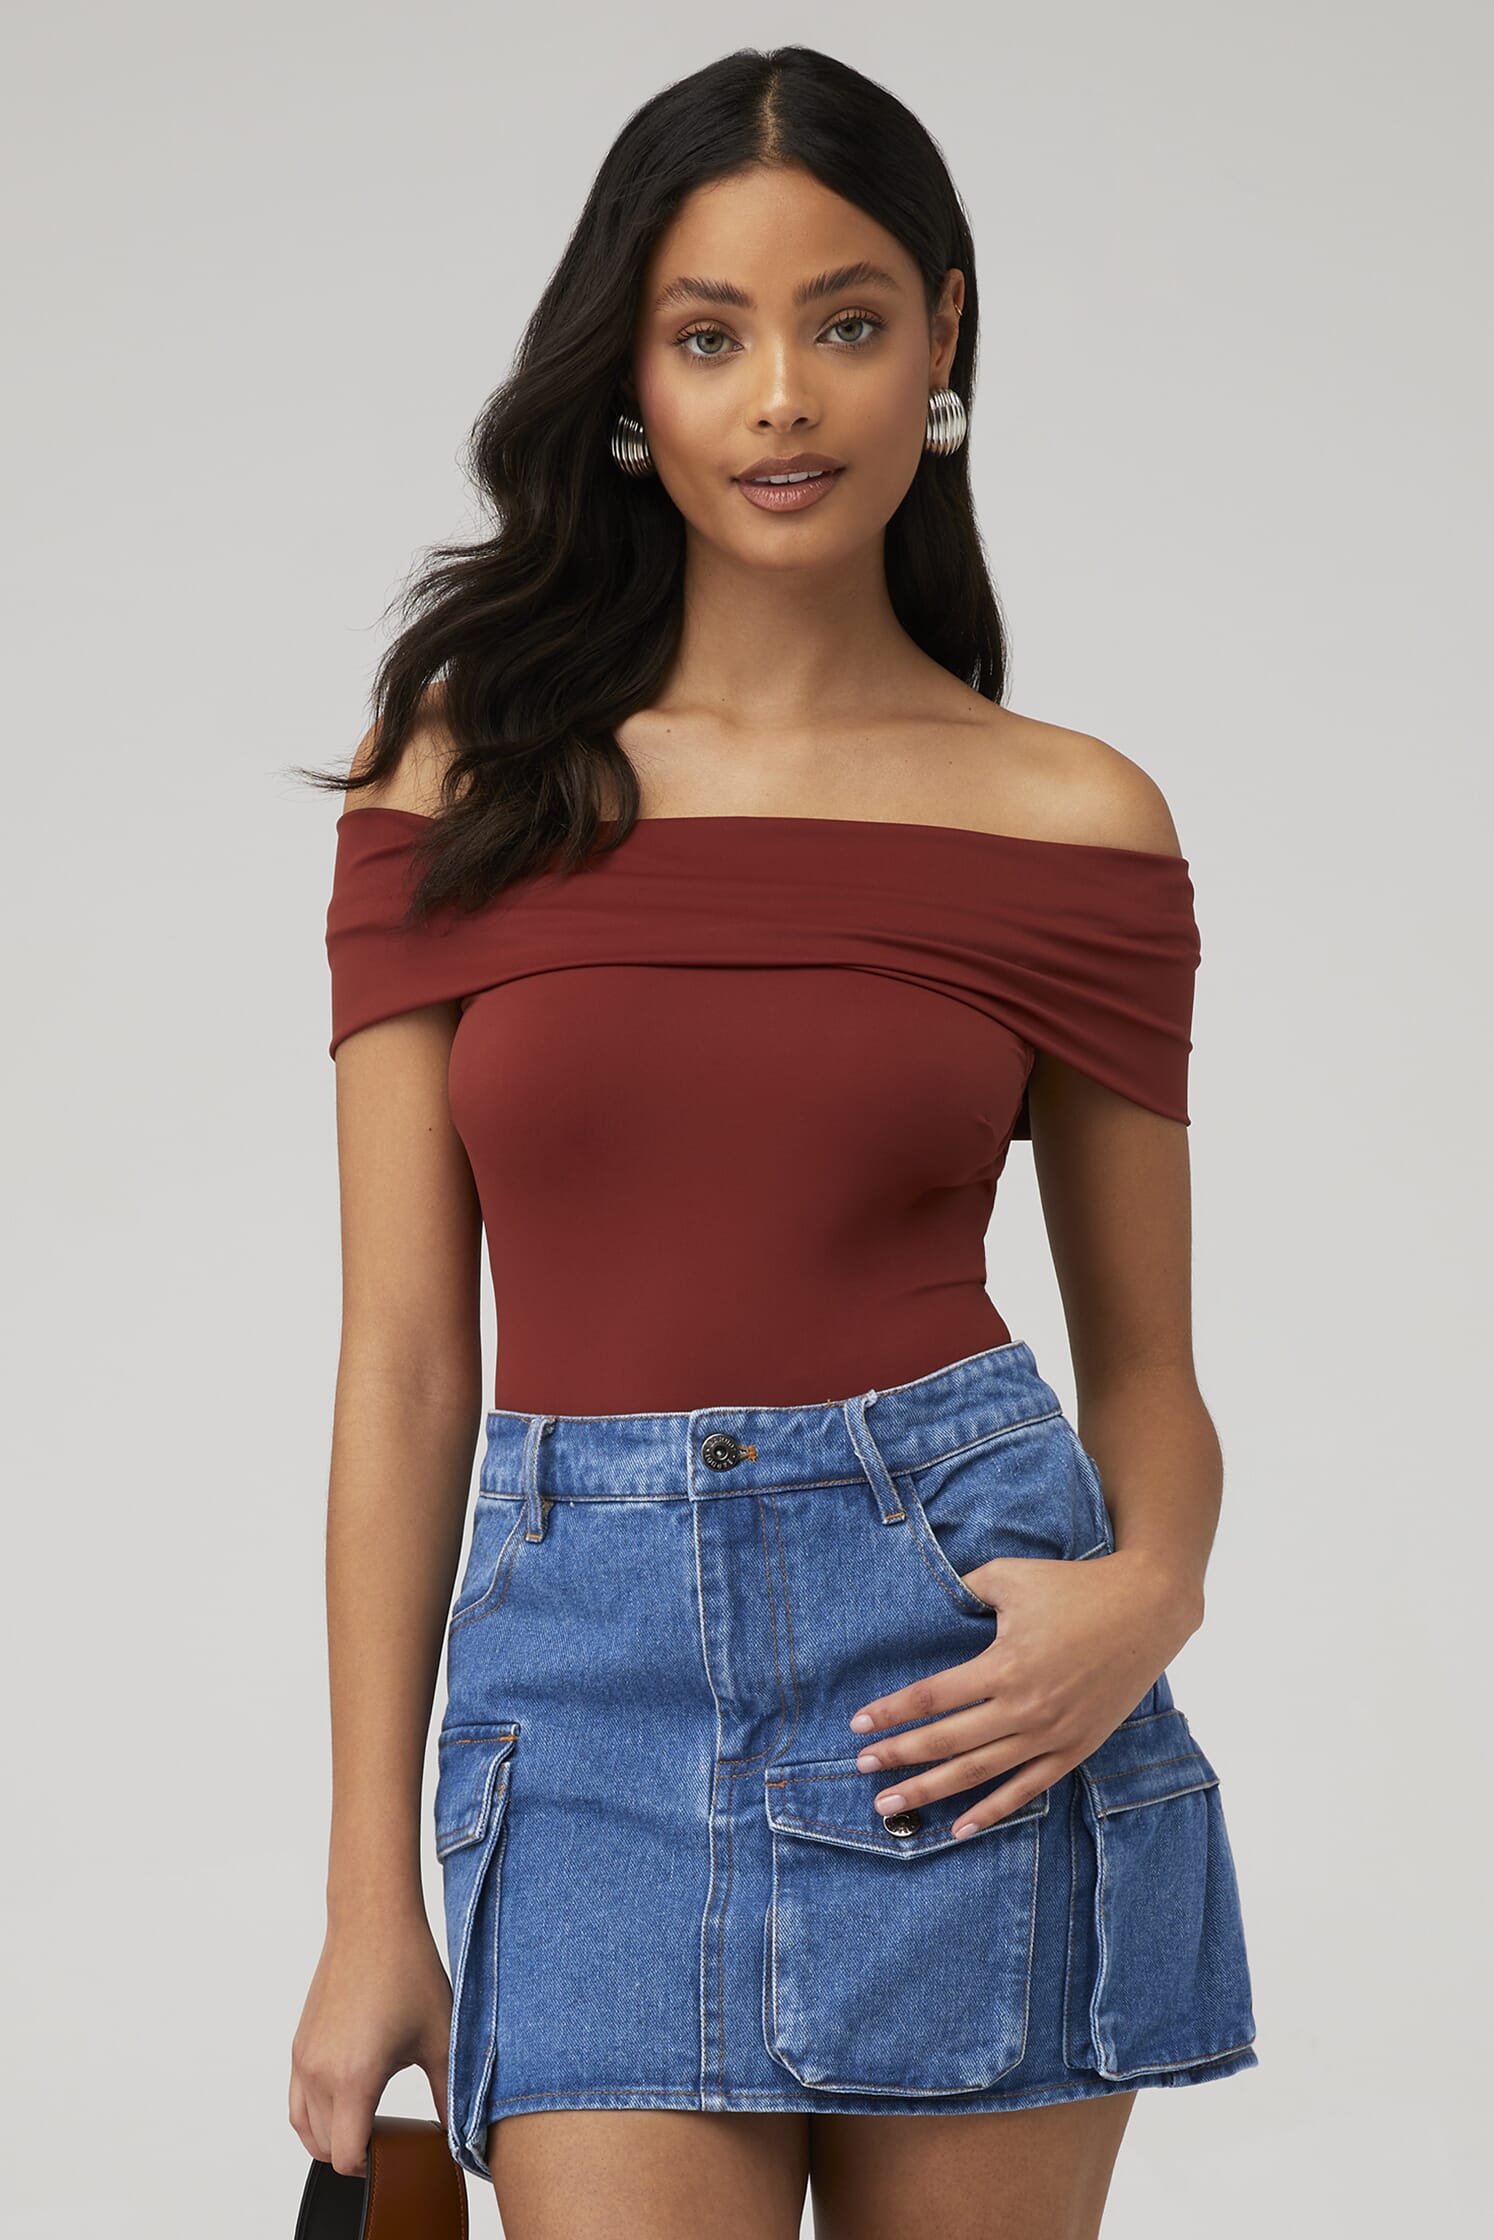 Hey queens, how do you guys recommend I keep a strapless bodysuit